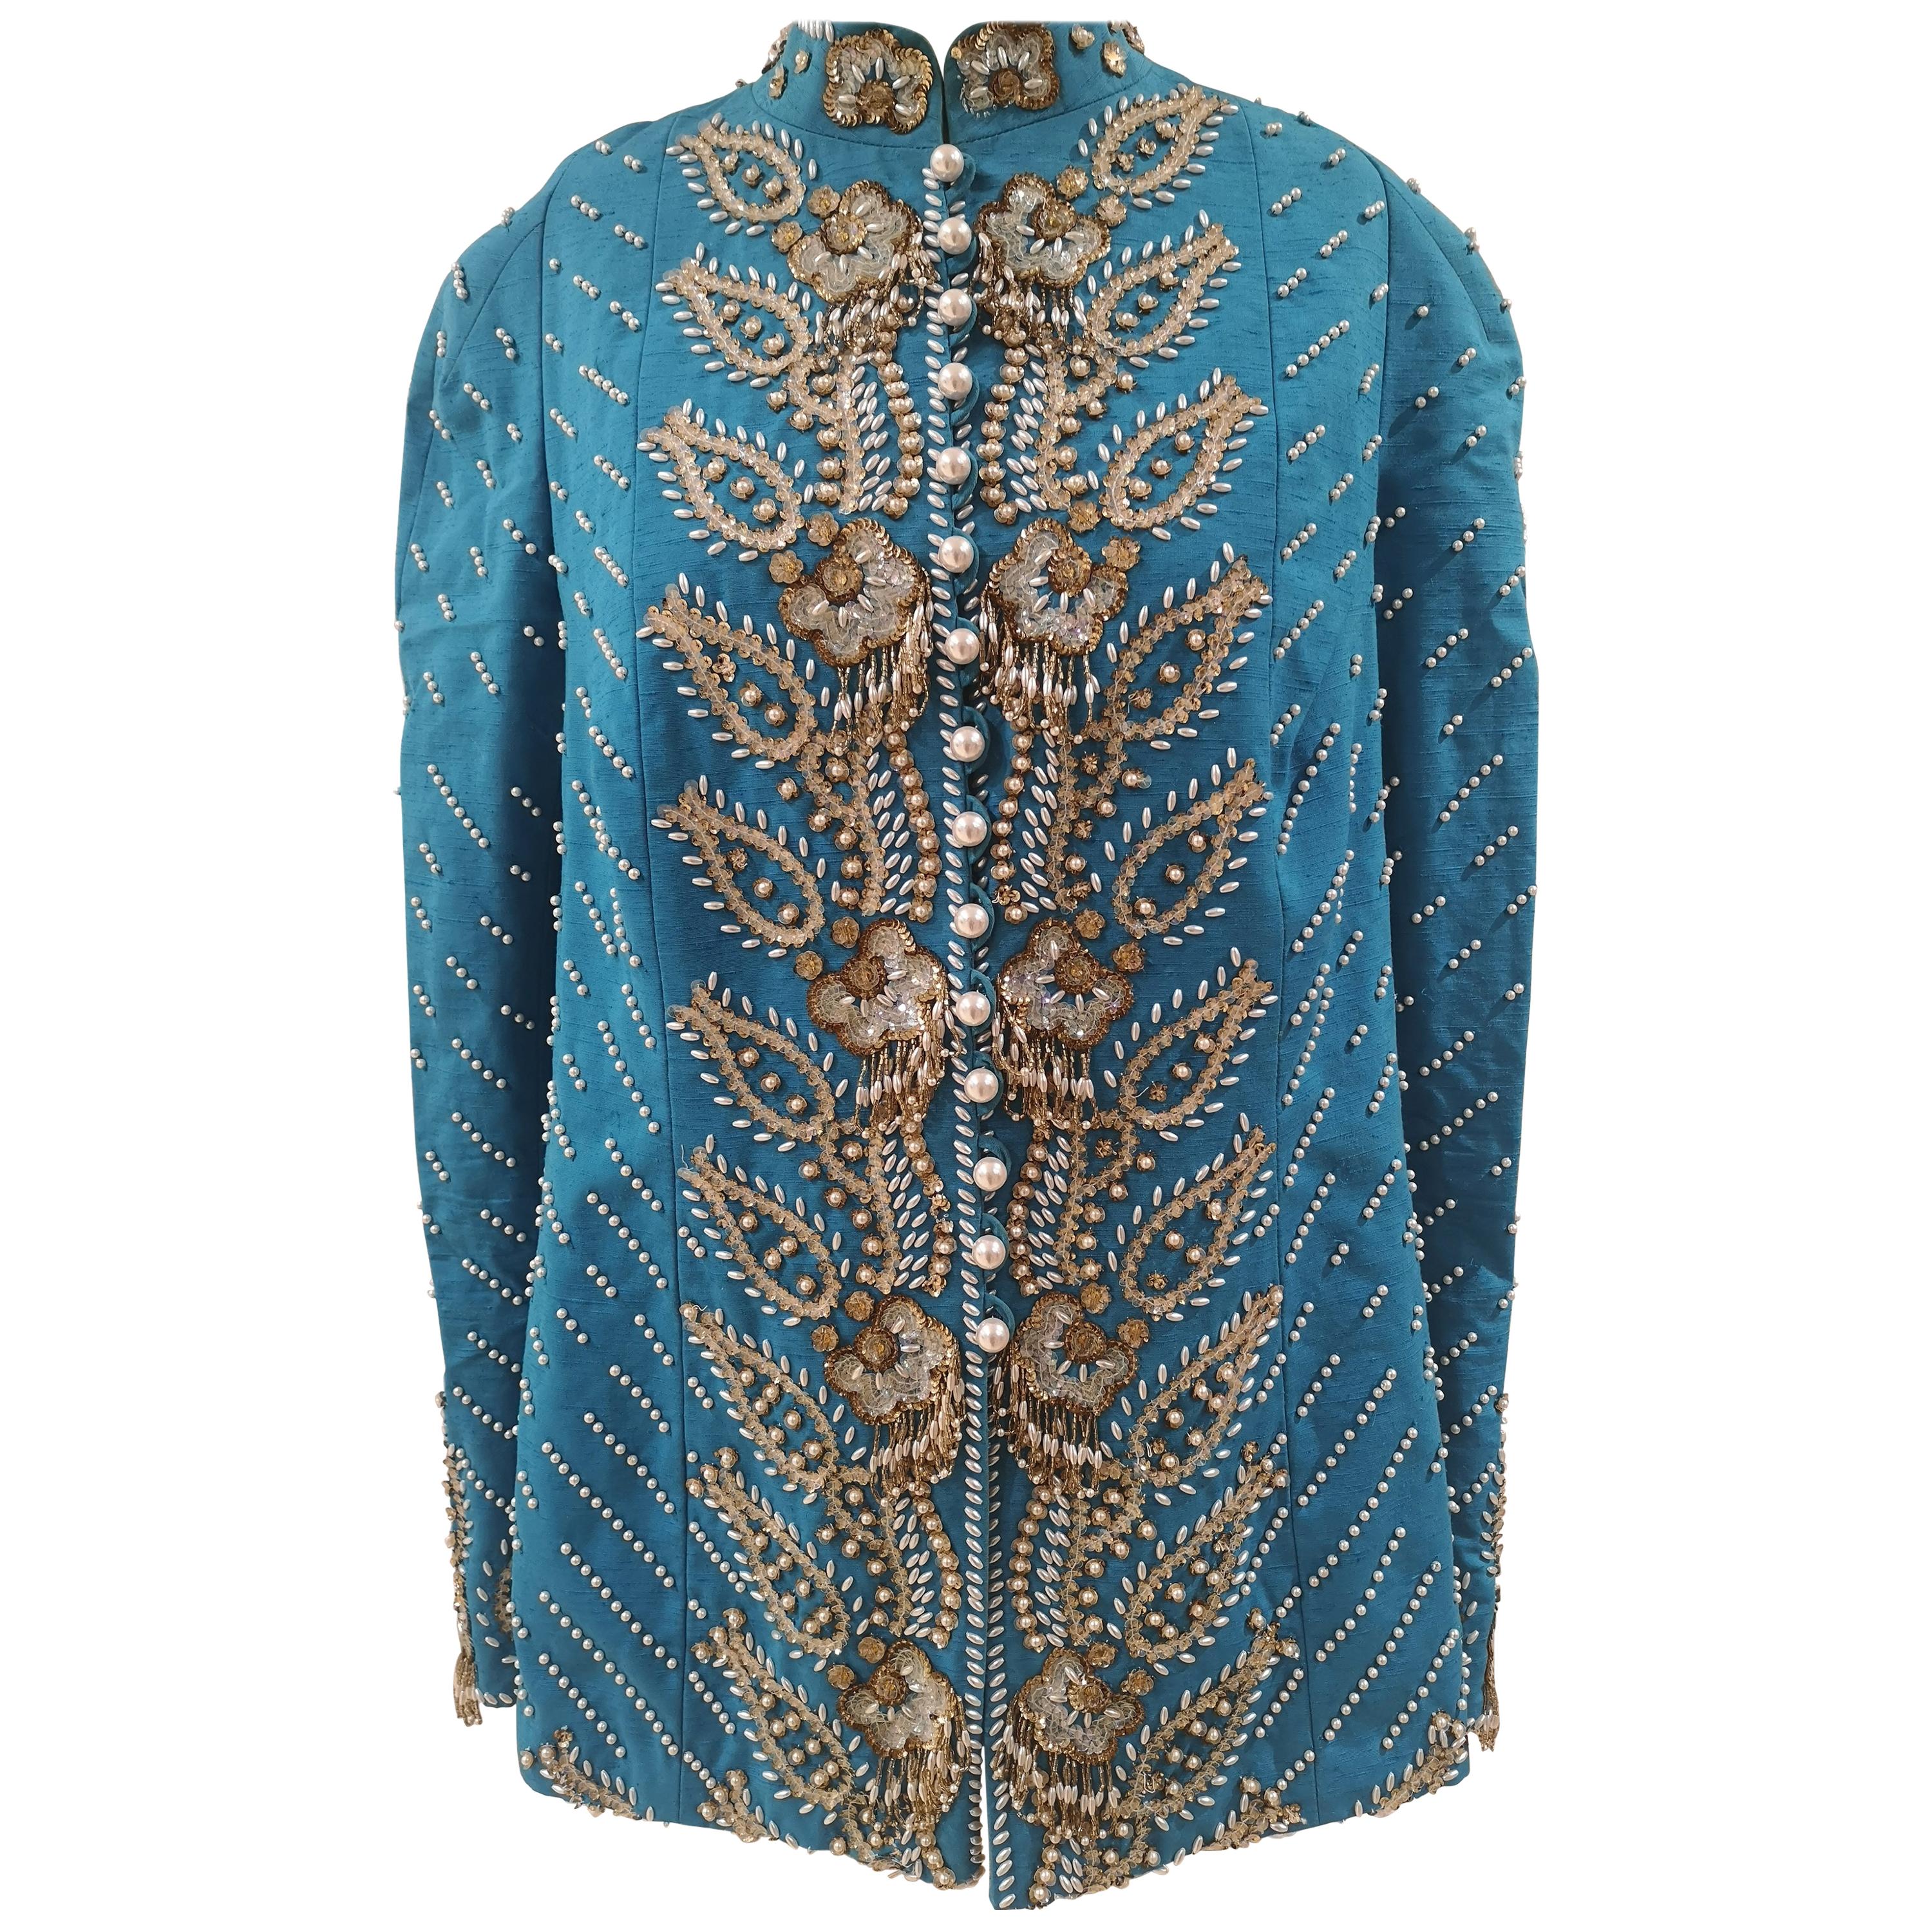 Christian Dior turquoise pearls beads sequins jacket